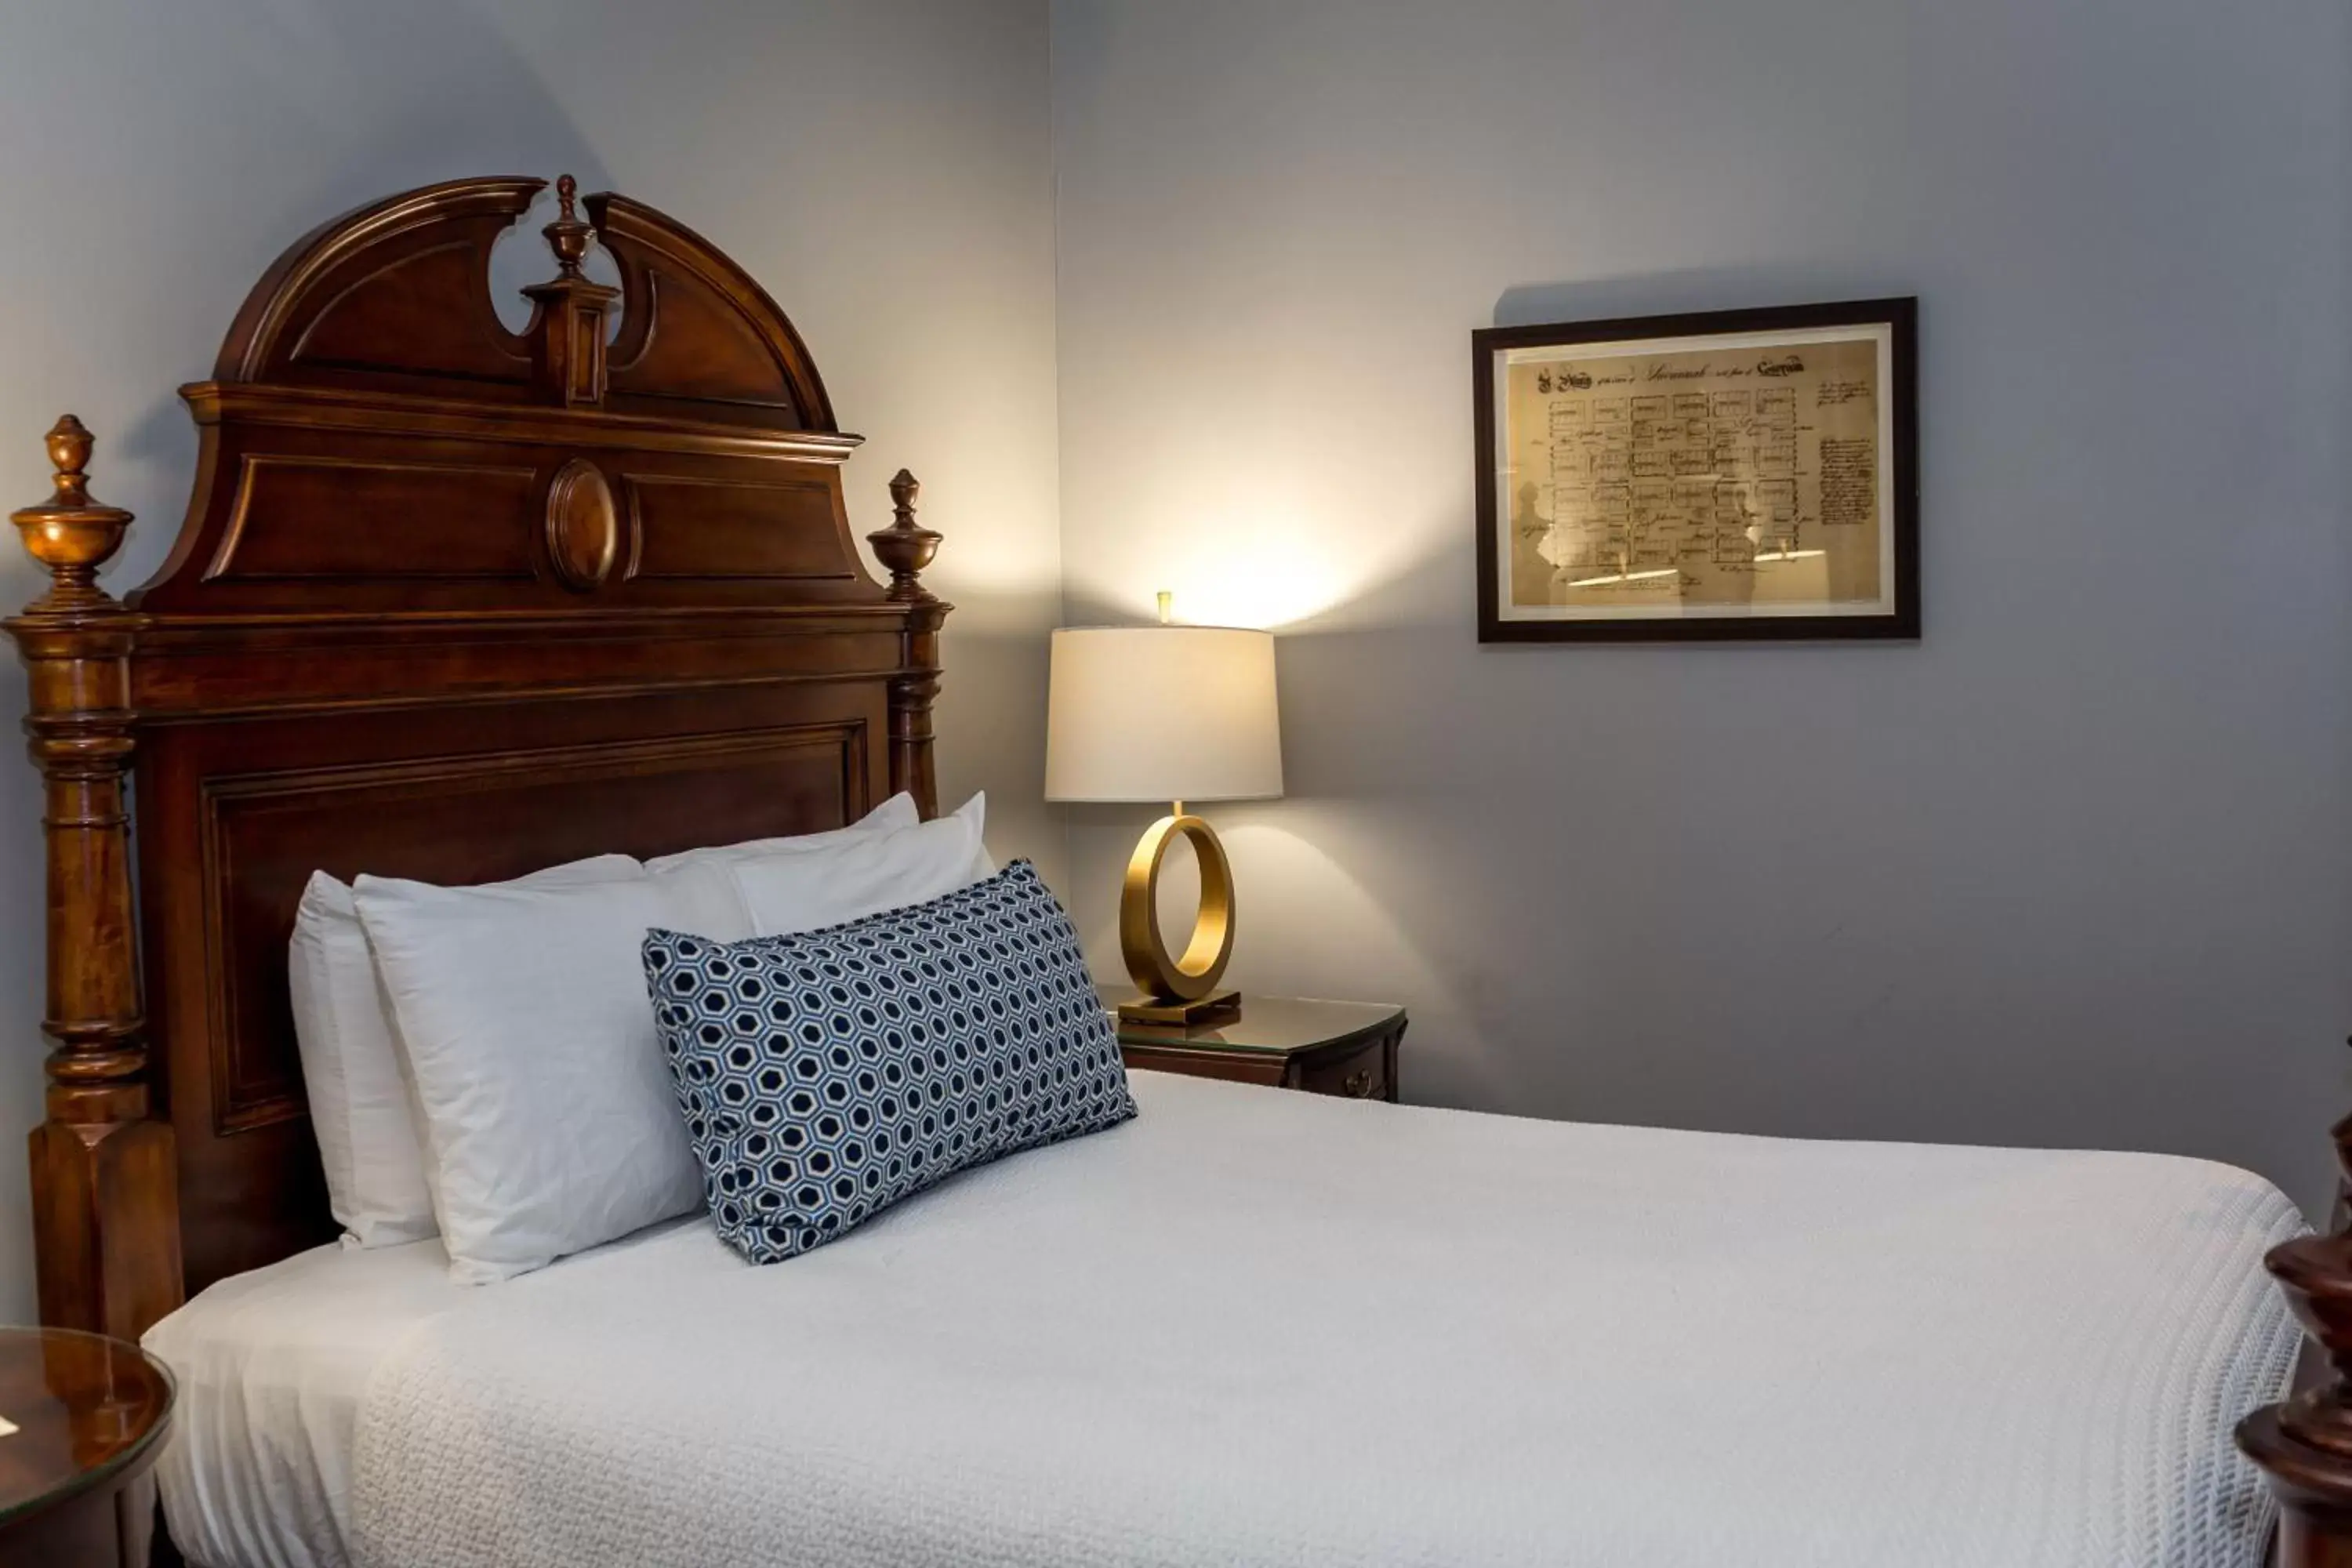 Deluxe Queen Room with Two Queen Beds in East Bay Inn, Historic Inns of Savannah Collection